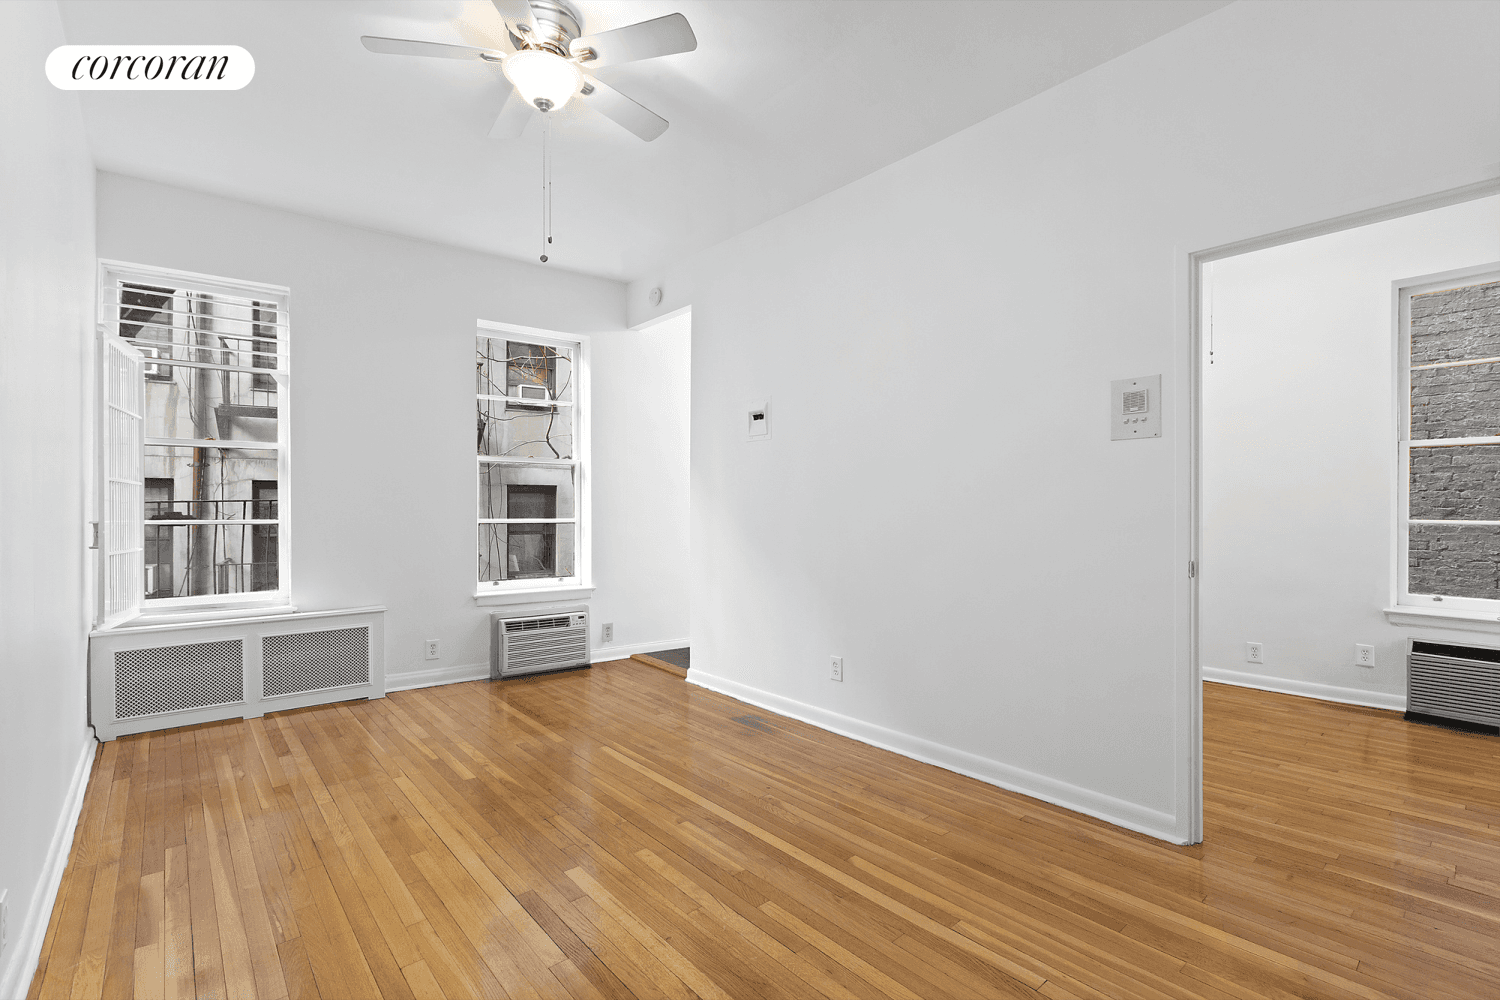 Well configured West Village 1 bedroom with three large over sized windows cascading light into the apartment all day long.